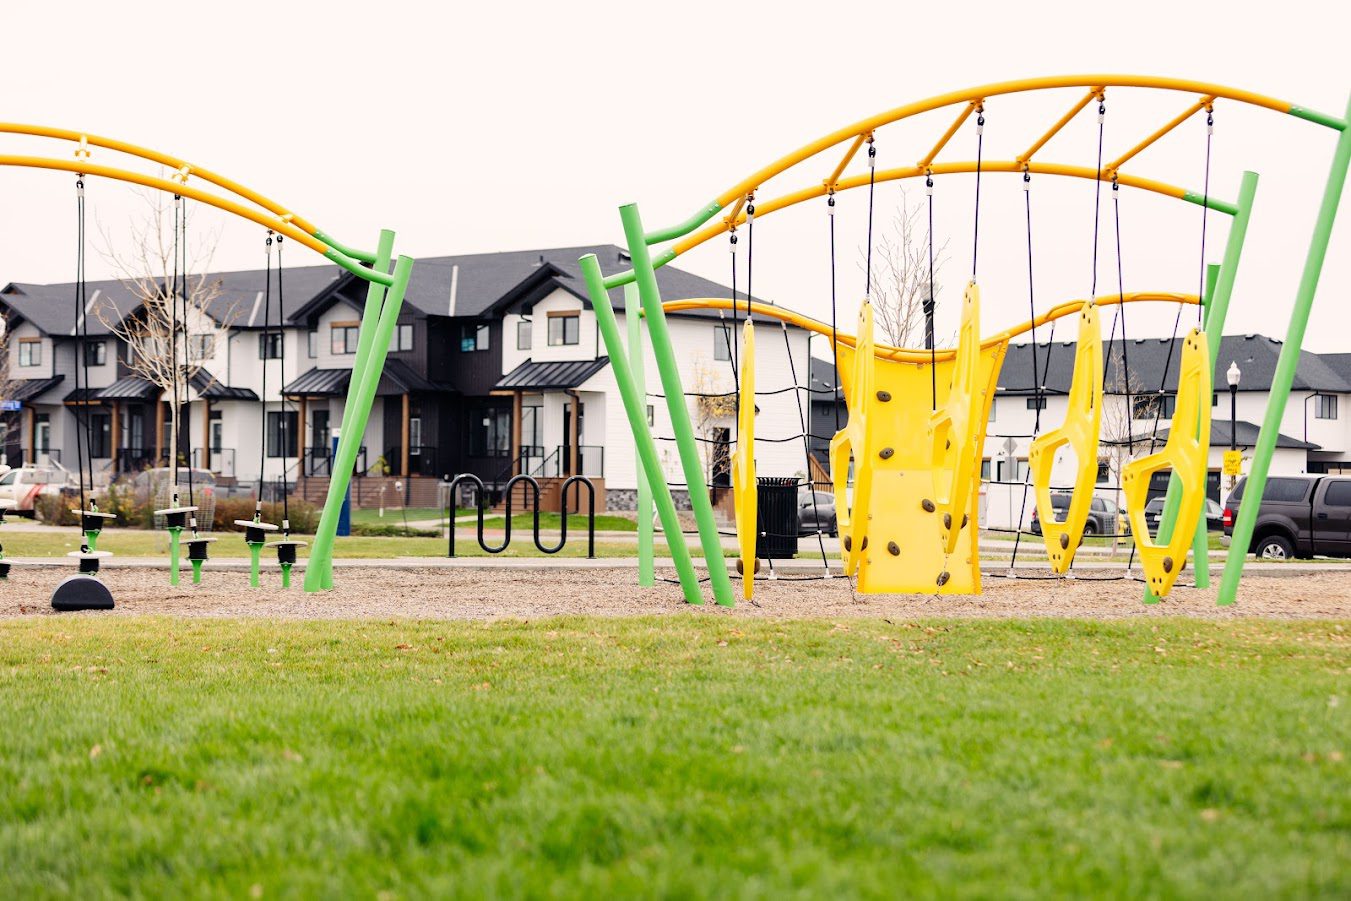 A playground with green and yellow swings in front of a house.